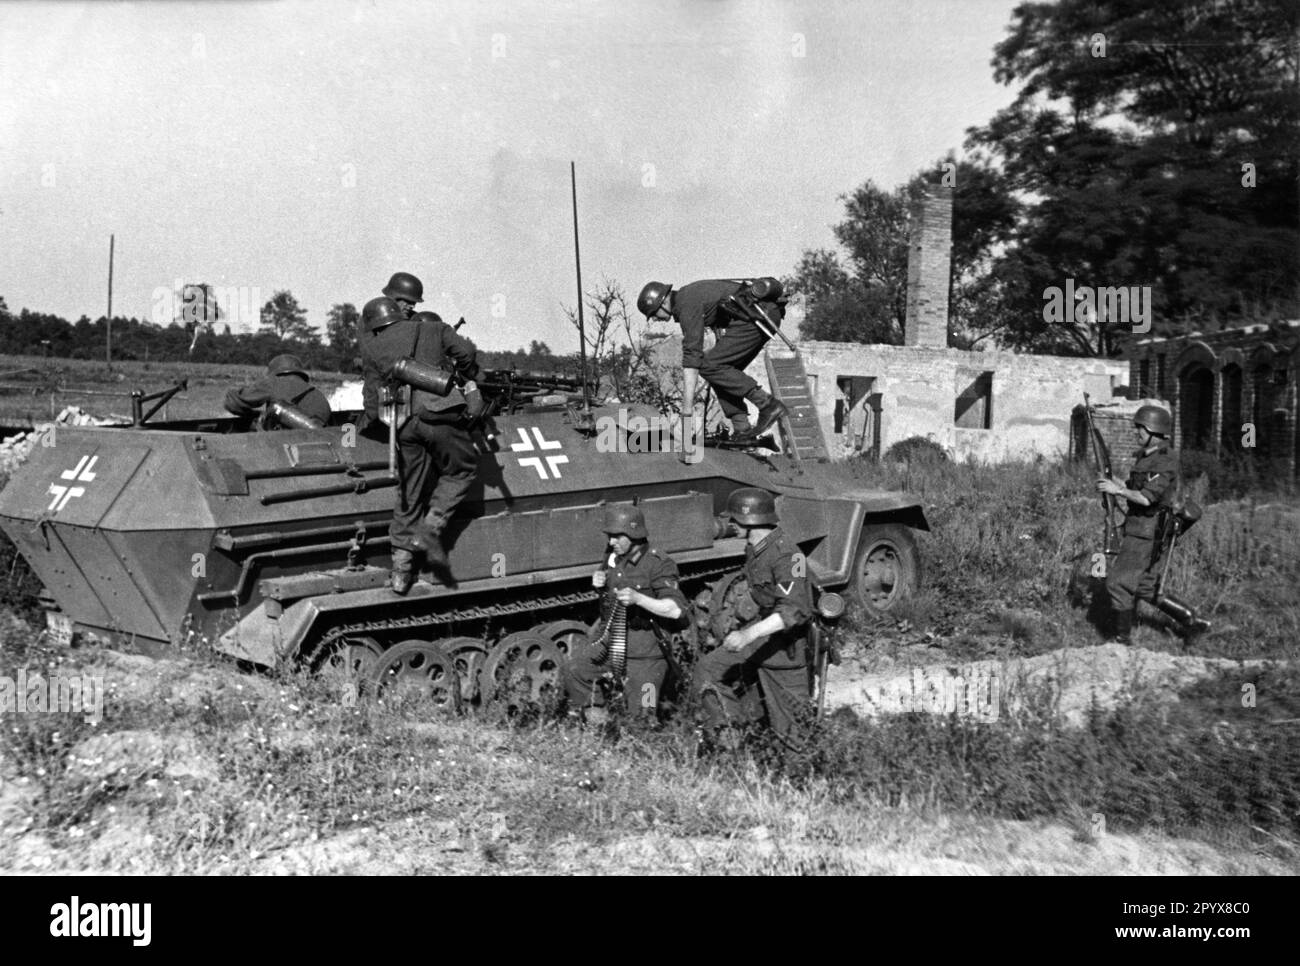 Wehrmacht infantry fighting vehicle during a demonstration, presumably at a military training area in Germany. Infantrymen are sitting down. Photo: Schwahn [automated translation] Stock Photo